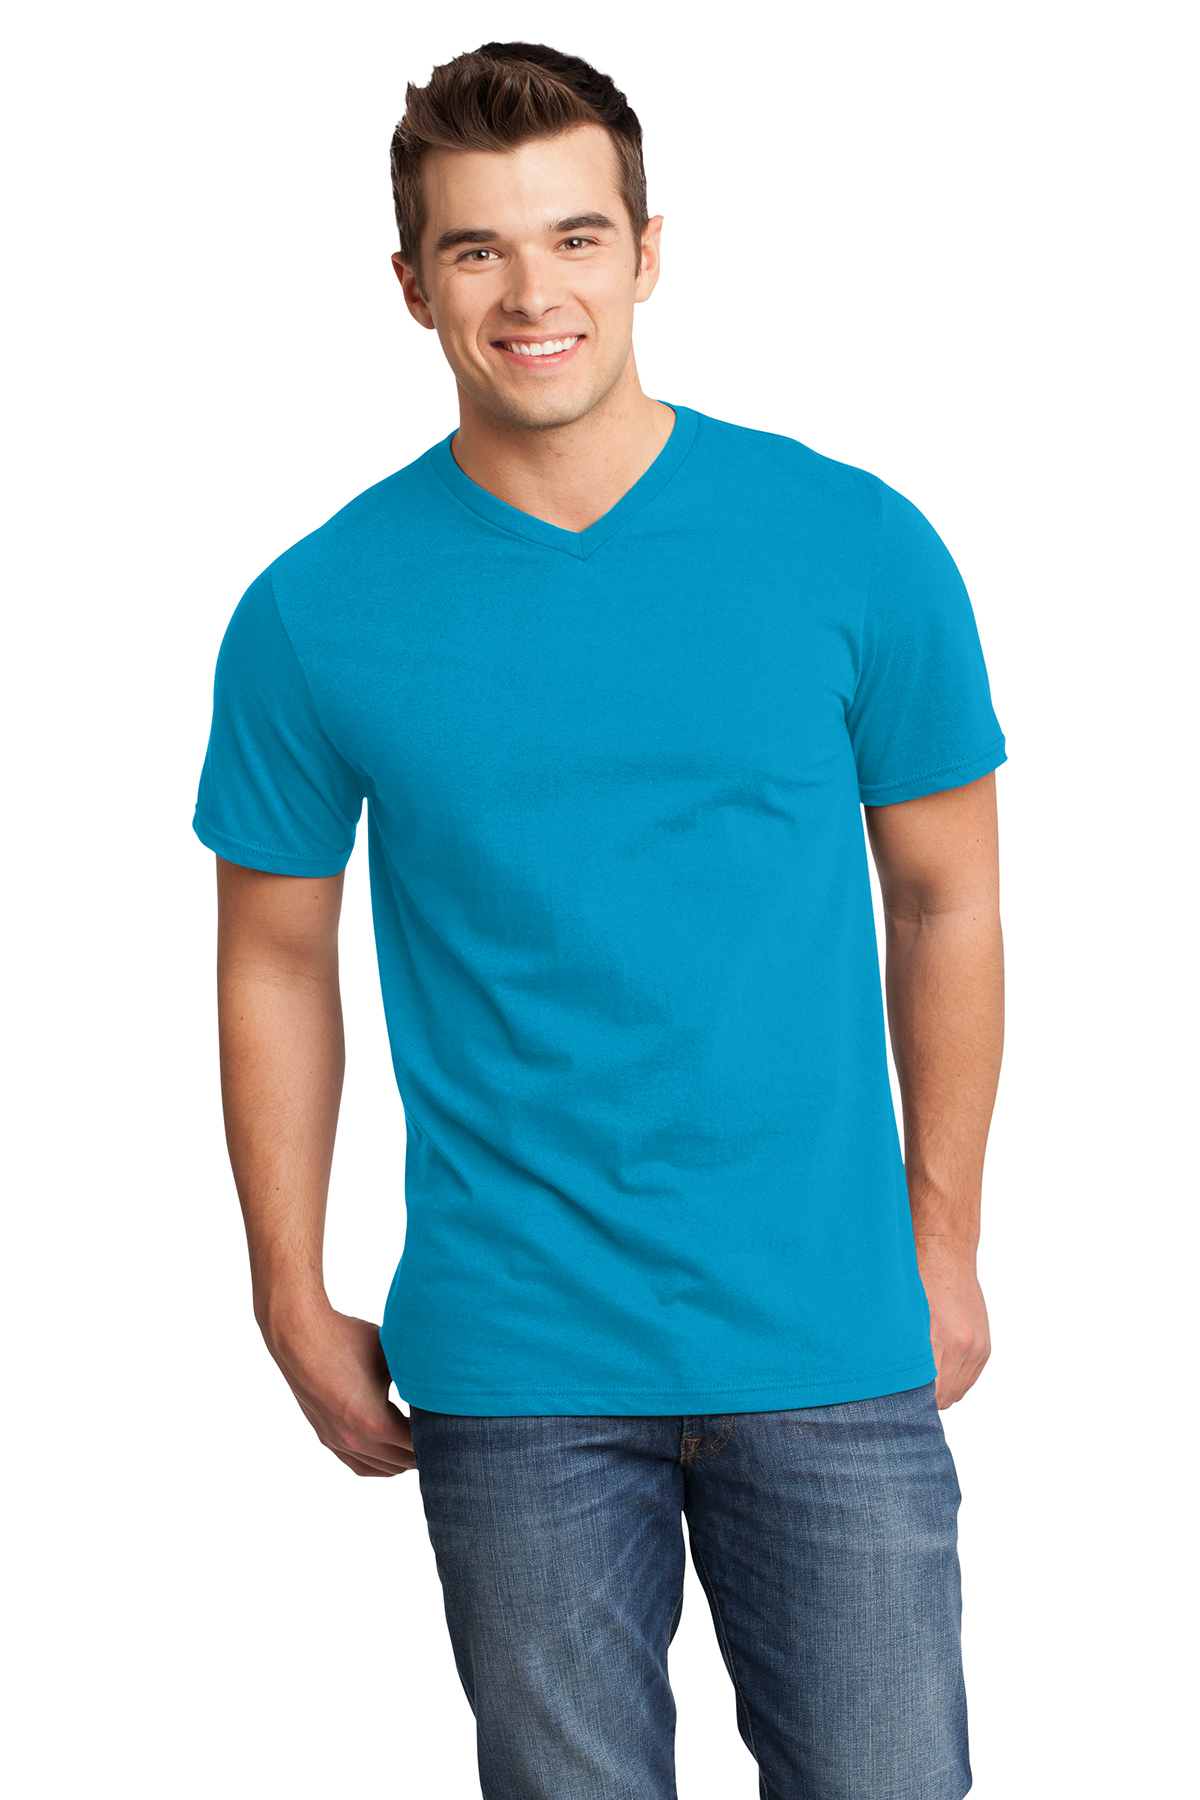 District - Young Mens Very Important Tee V-Neck. DT6500 - T-Shirts